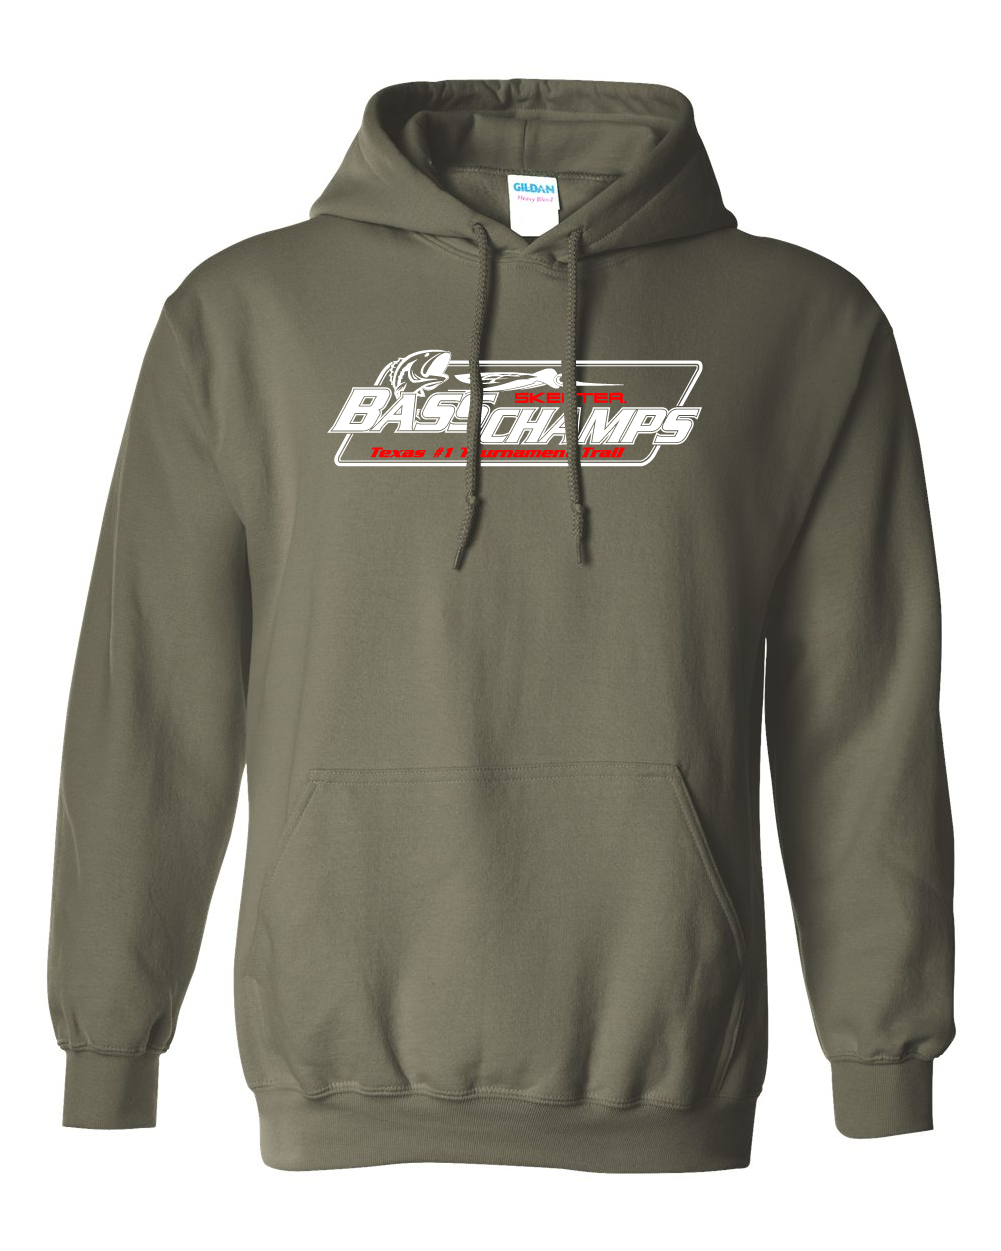 Bass Champs Logo Hoodie. Cotton Blend Traditional Hoodie